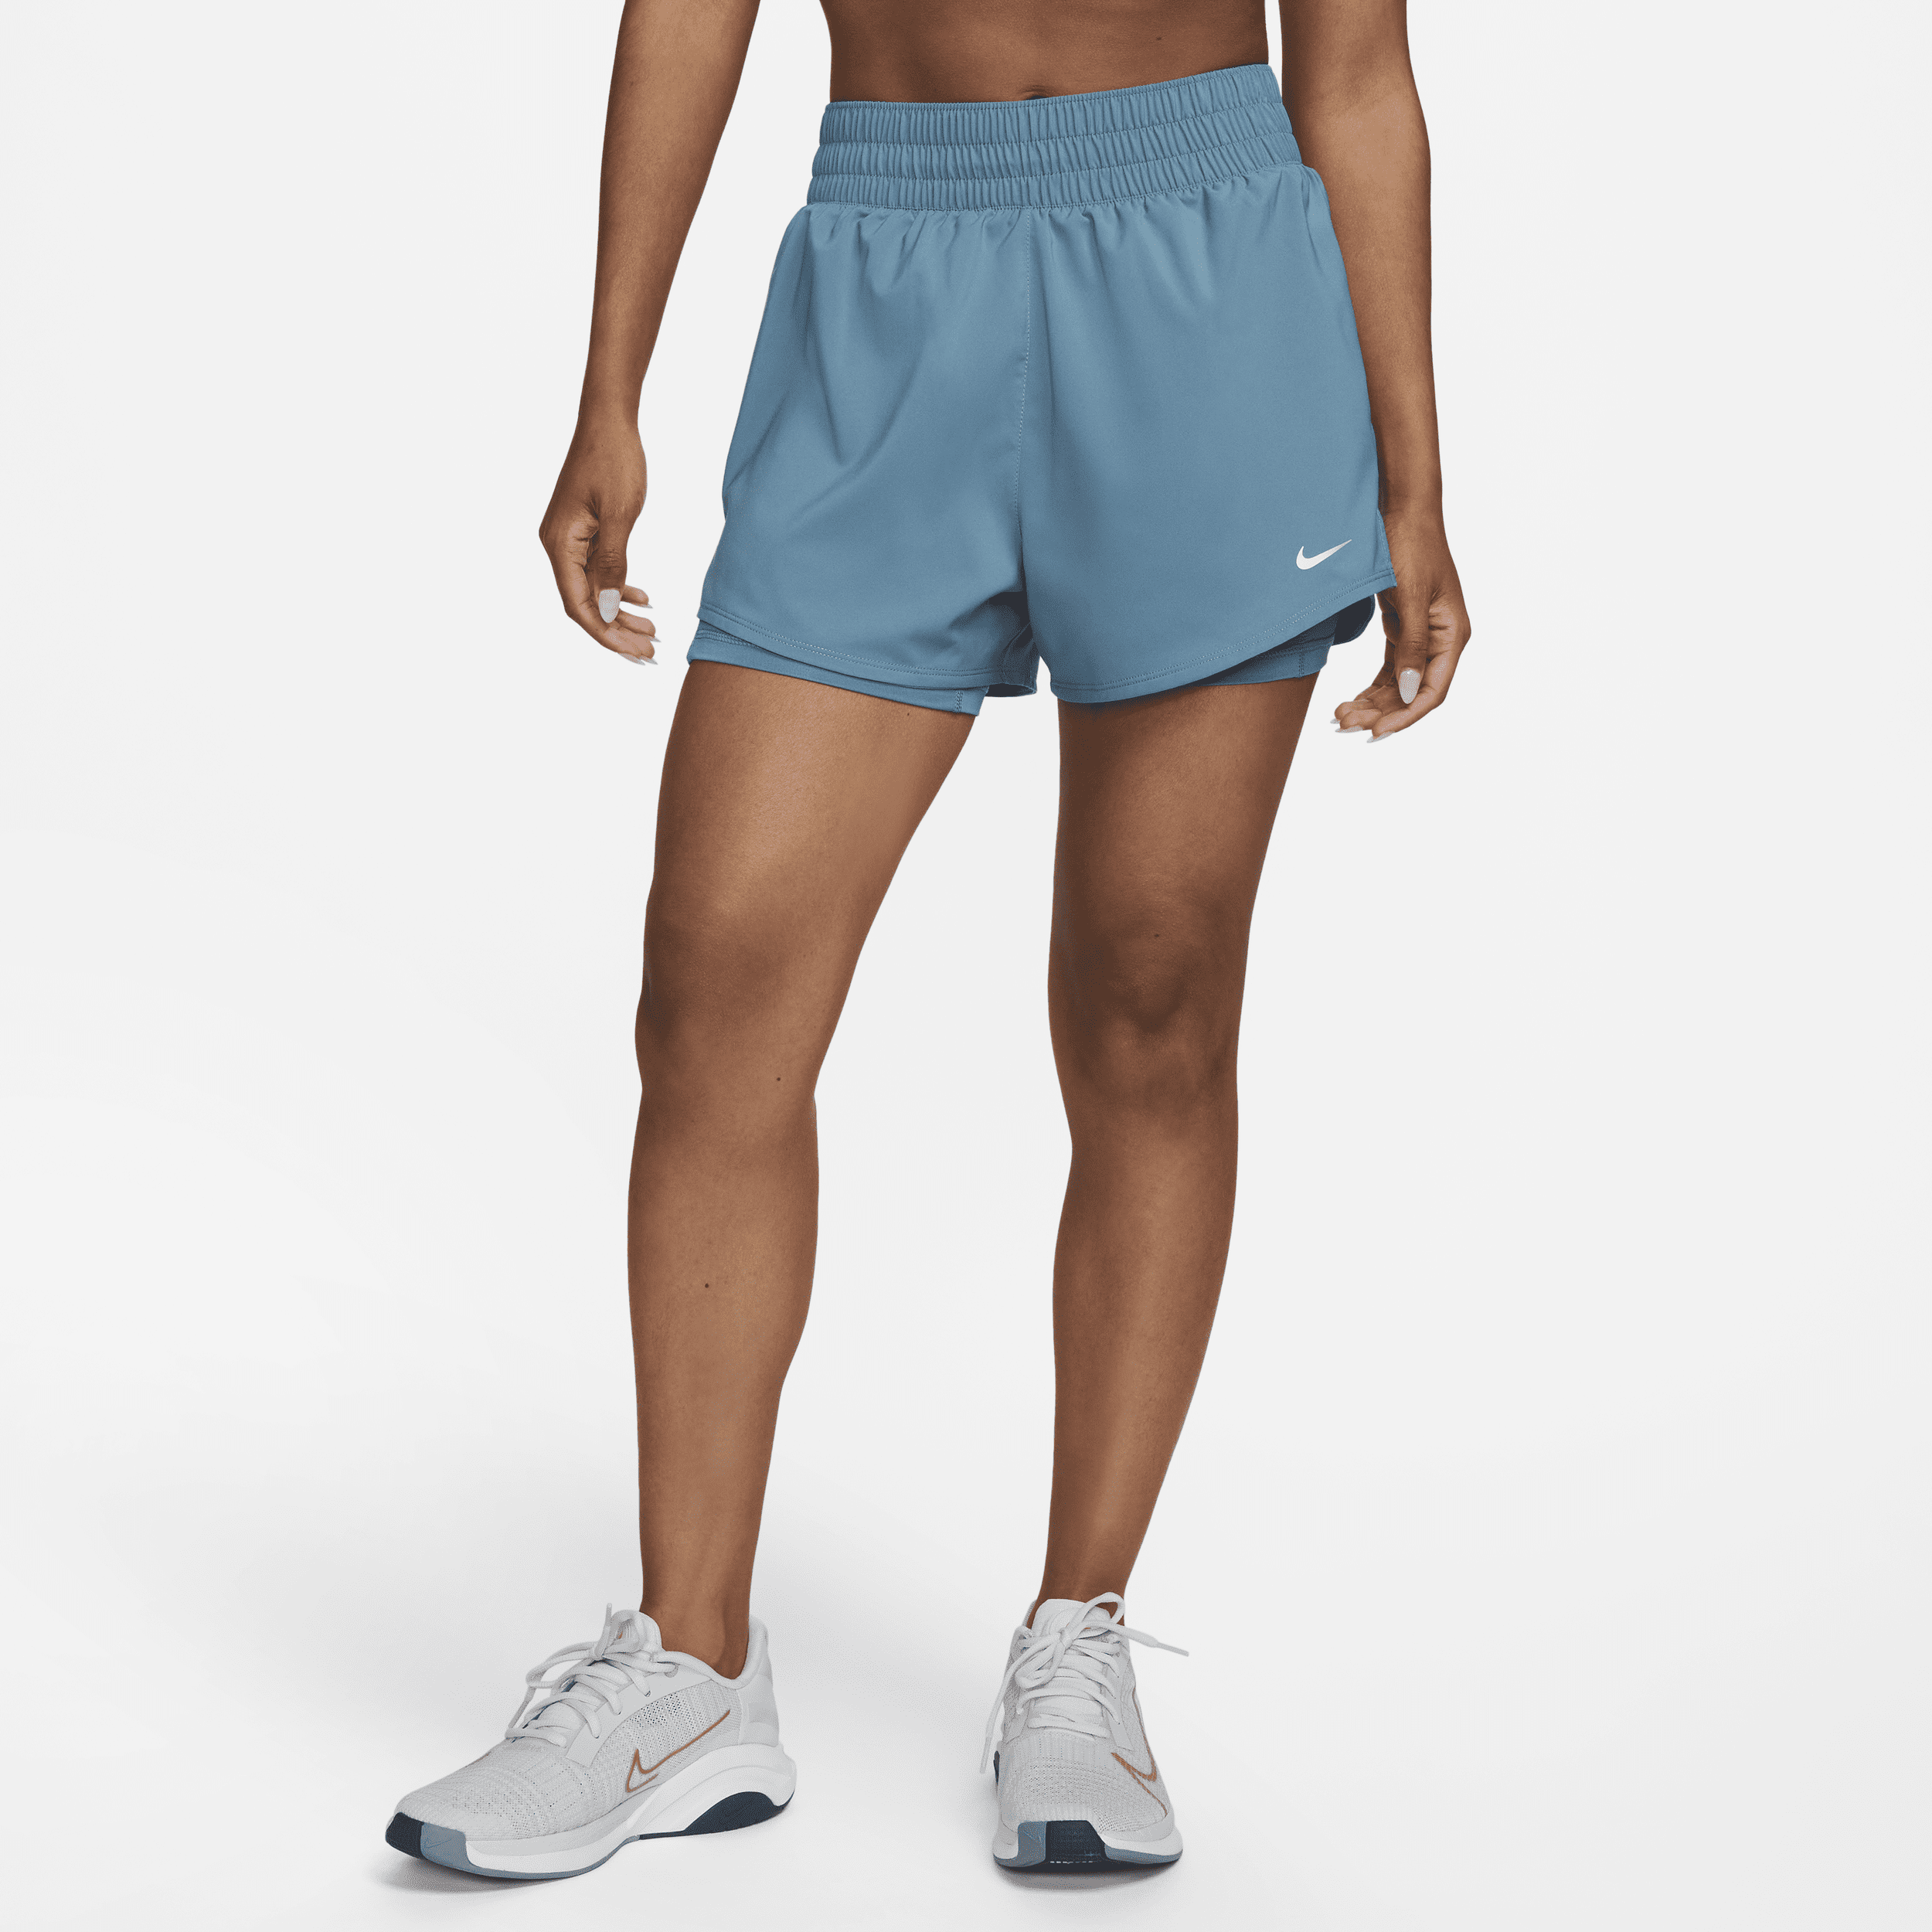 NIKE WOMEN'S ONE DRI-FIT HIGH-WAISTED 3" 2-IN-1 SHORTS,1008061759